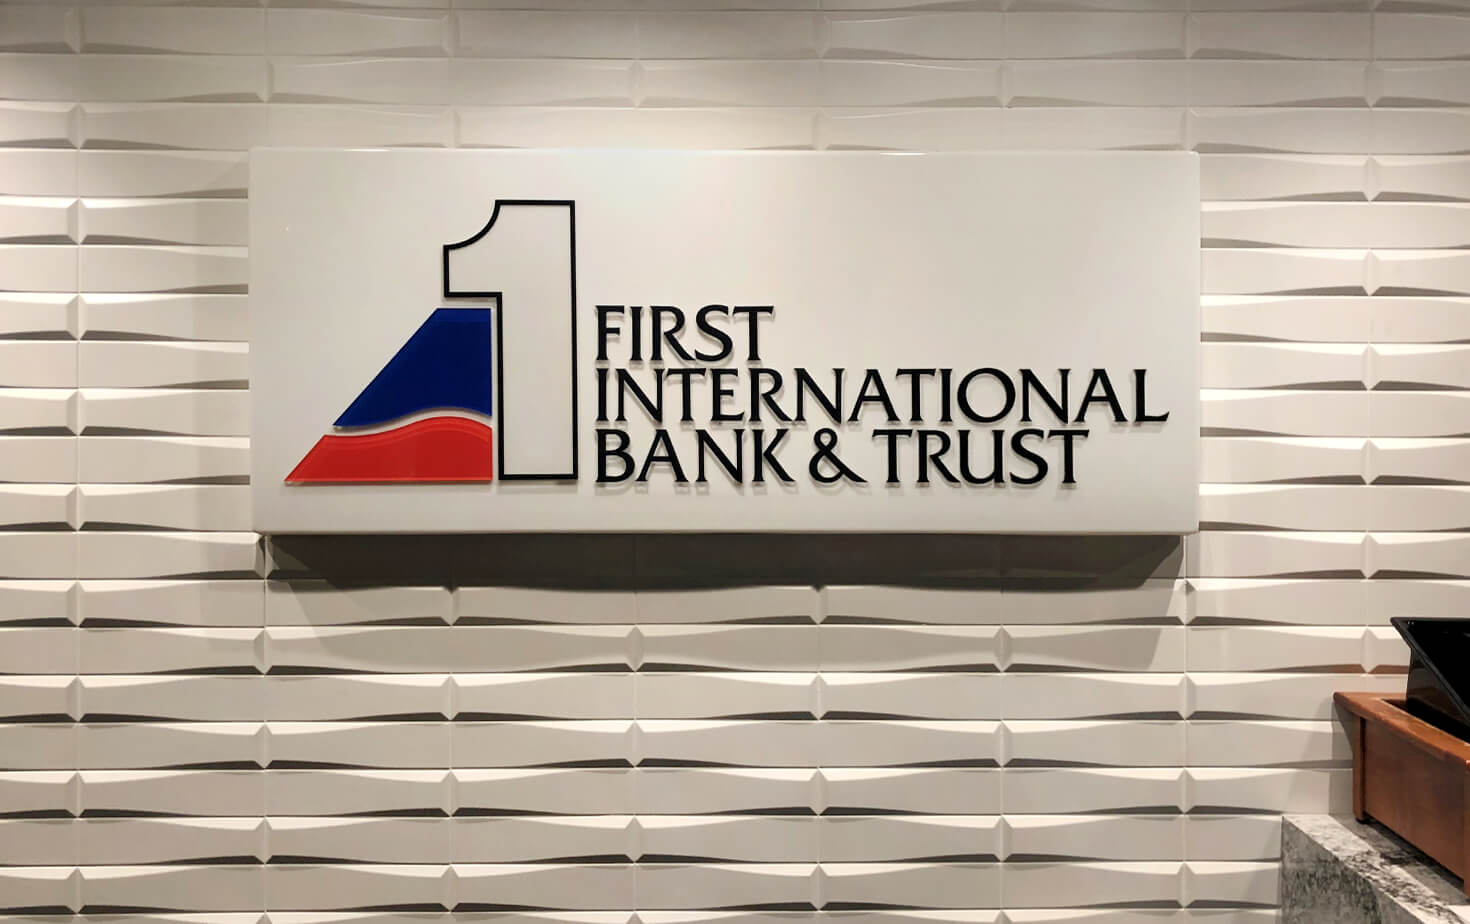 First International Bank and Trust Interior Logo Wall Sign Illuminated mounted on textured wall